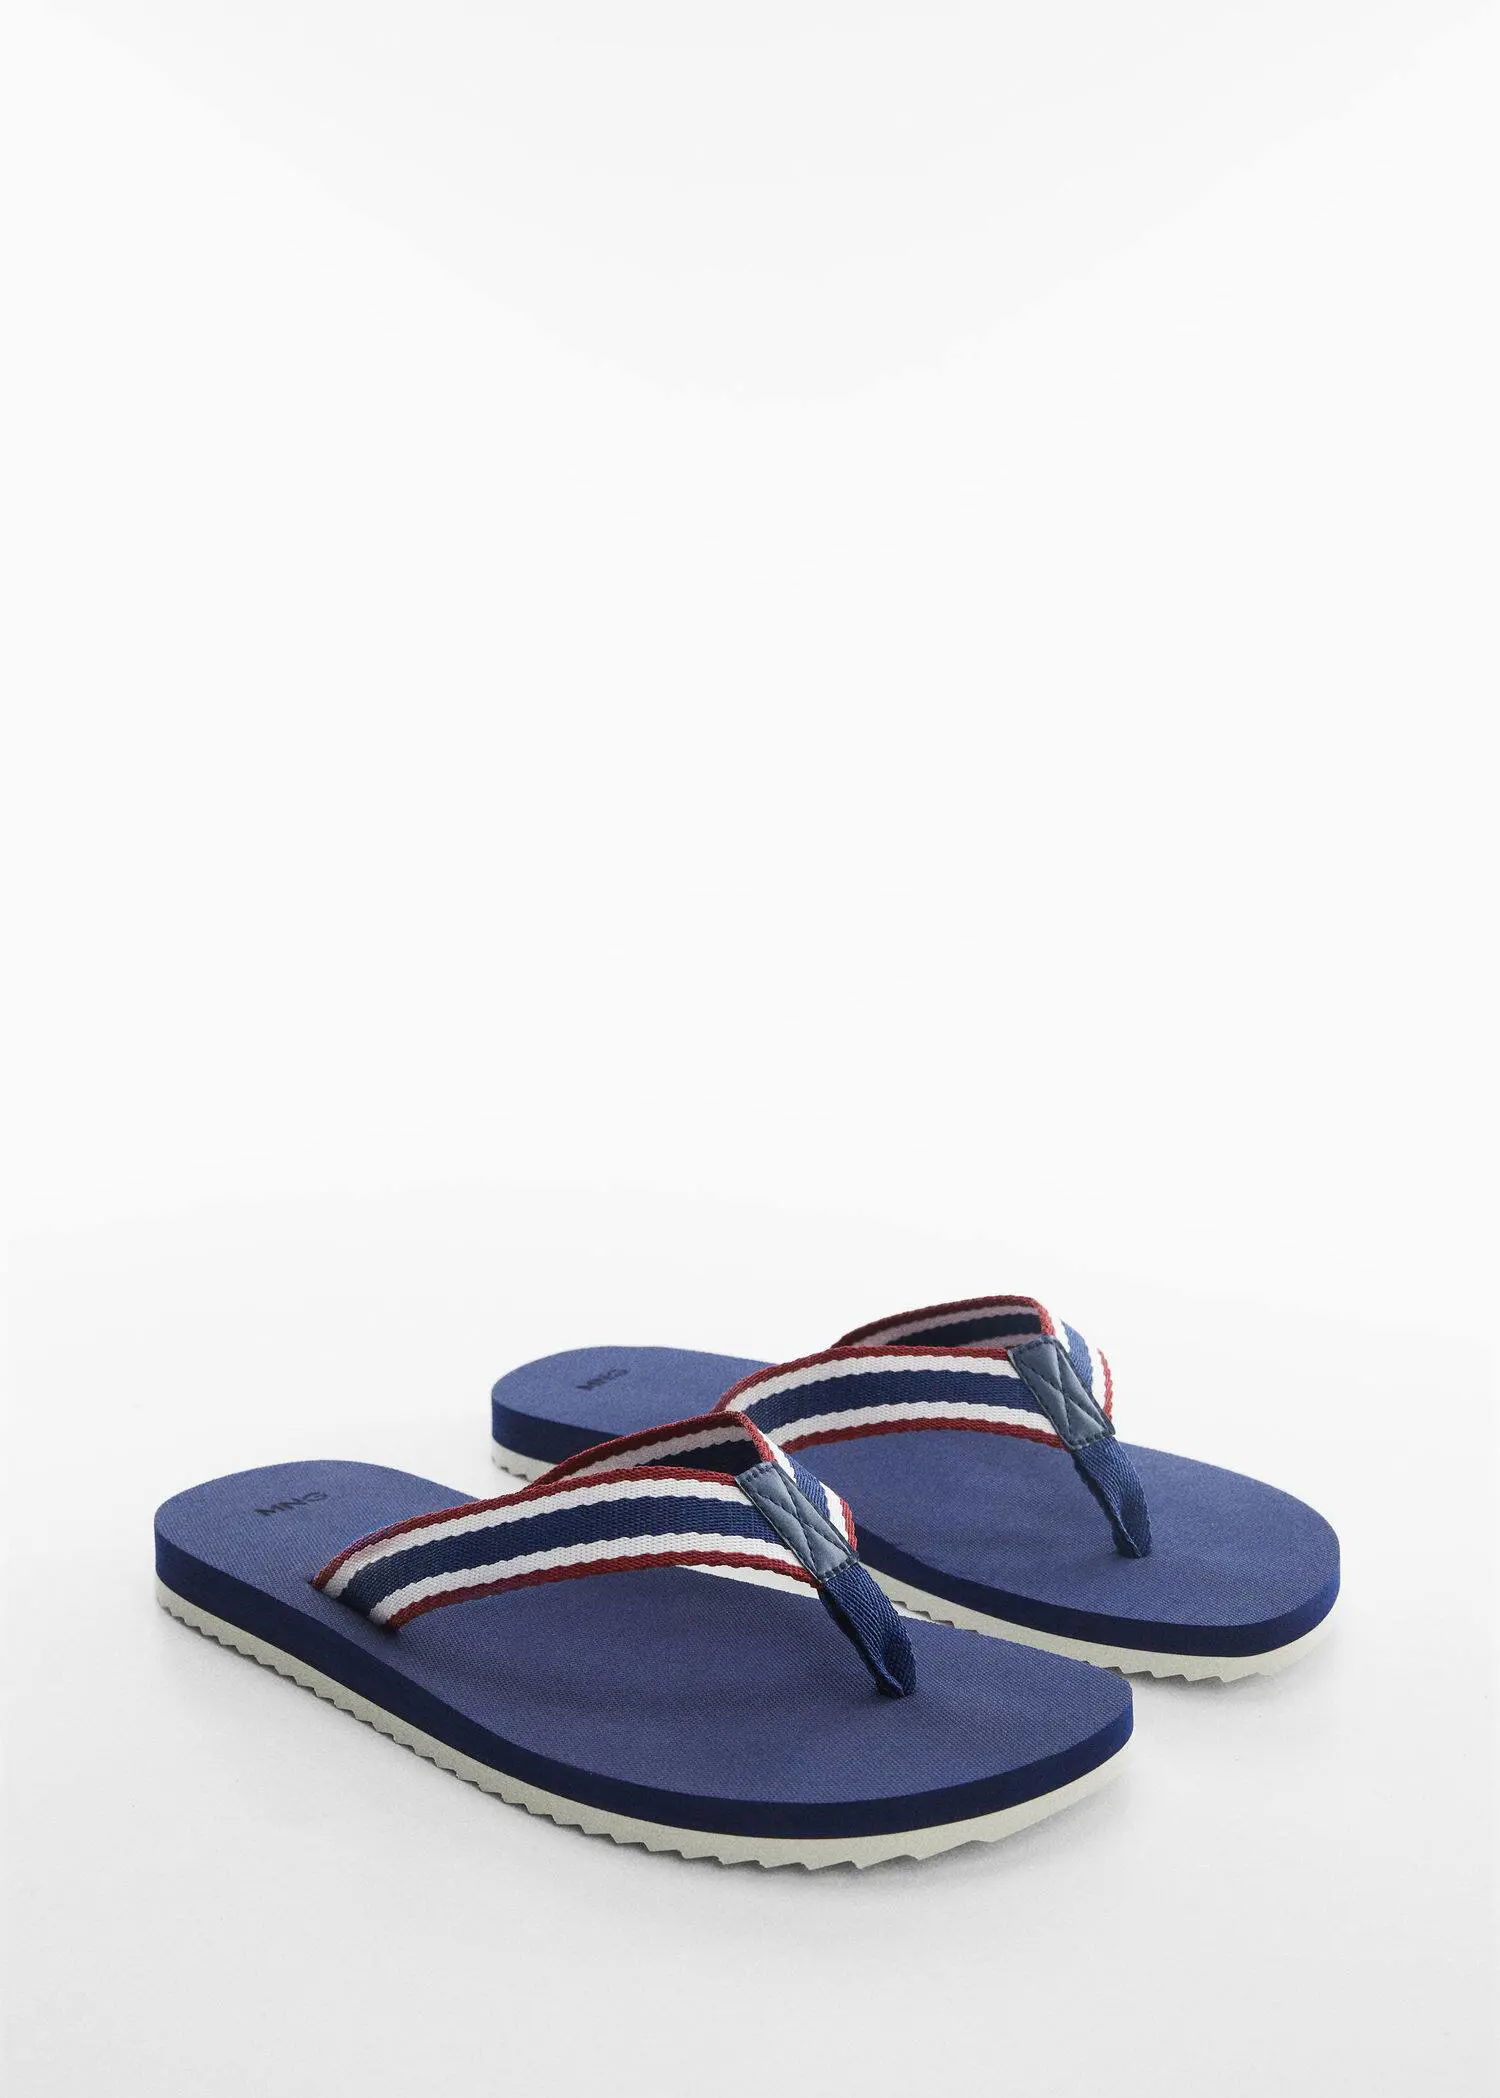 Mango Flip-flops with contrasting colour straps. a pair of flip flops on a white surface. 